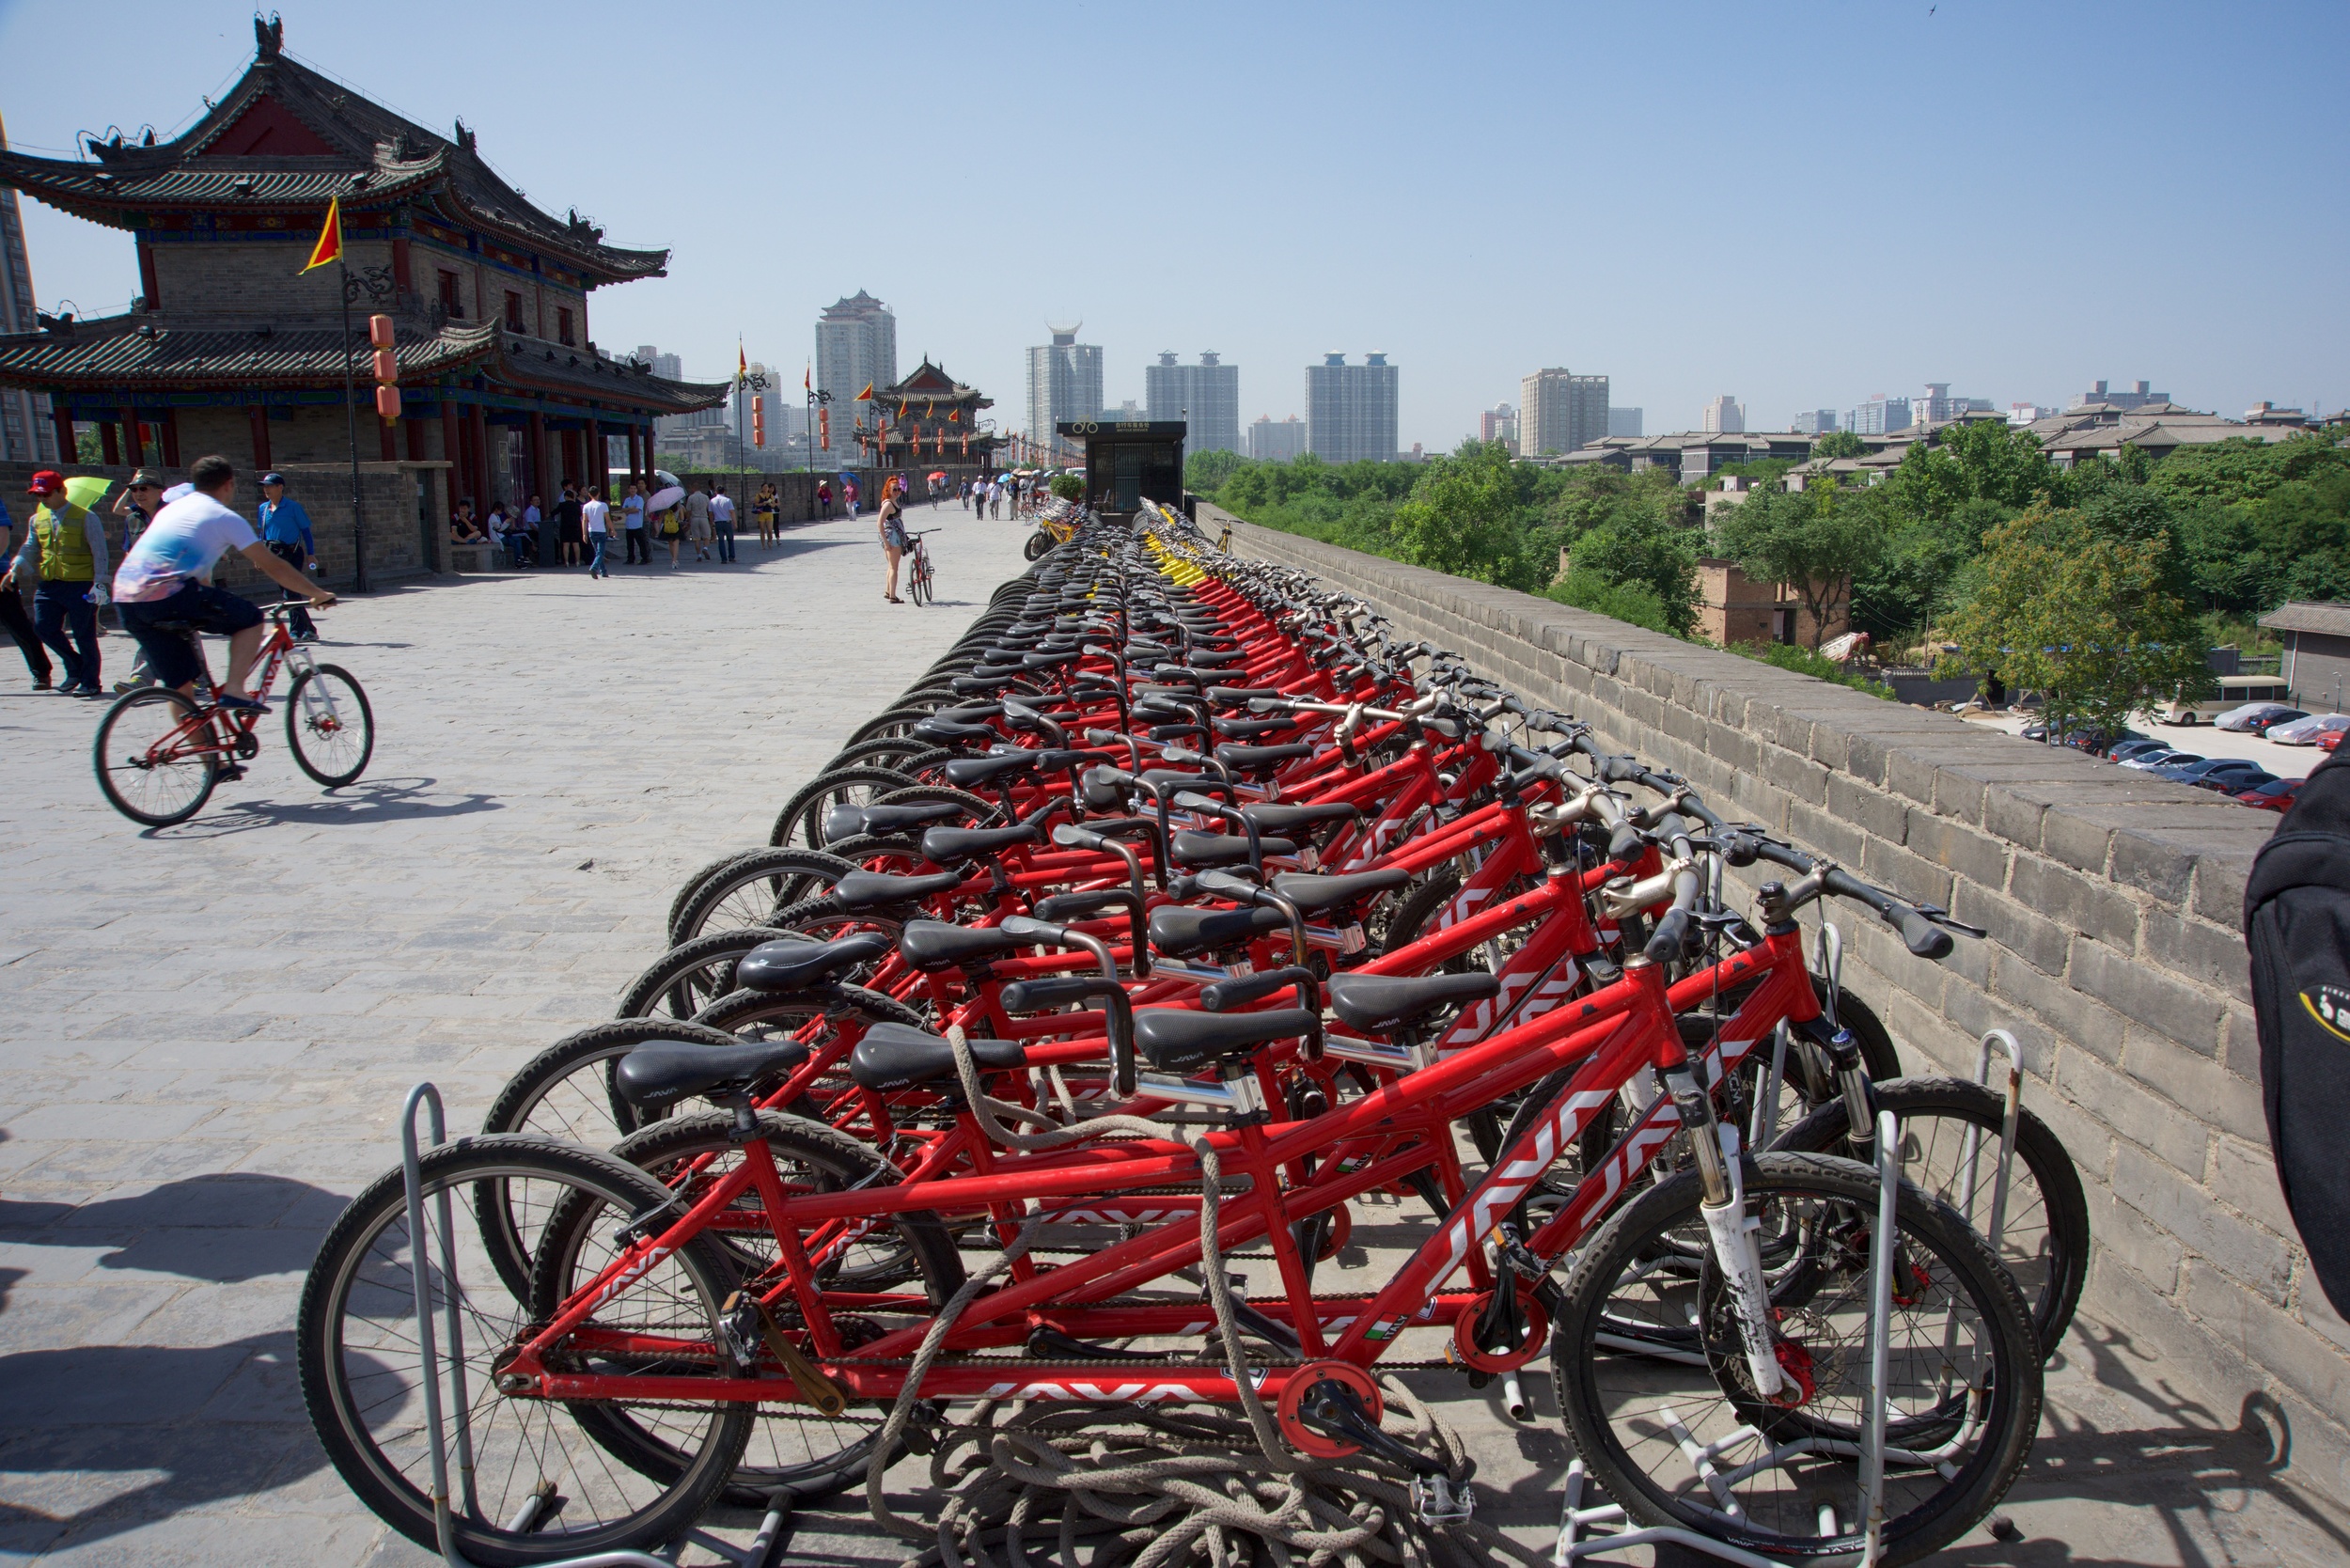  Bikes for hire, East Gate, Xi'an City Wall, Xi'an 